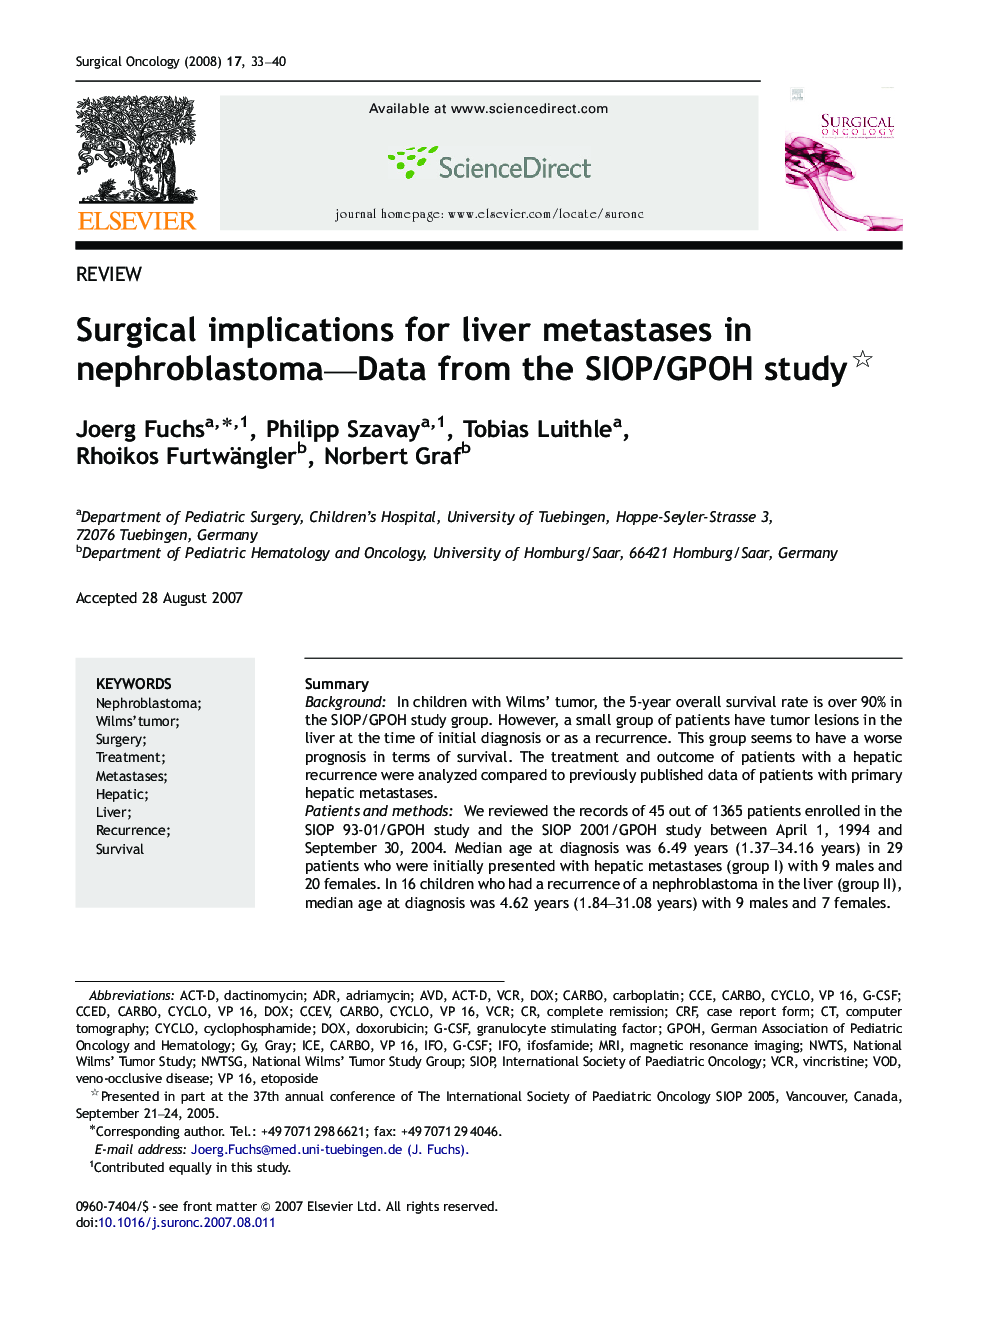 Surgical implications for liver metastases in nephroblastoma—Data from the SIOP/GPOH study 